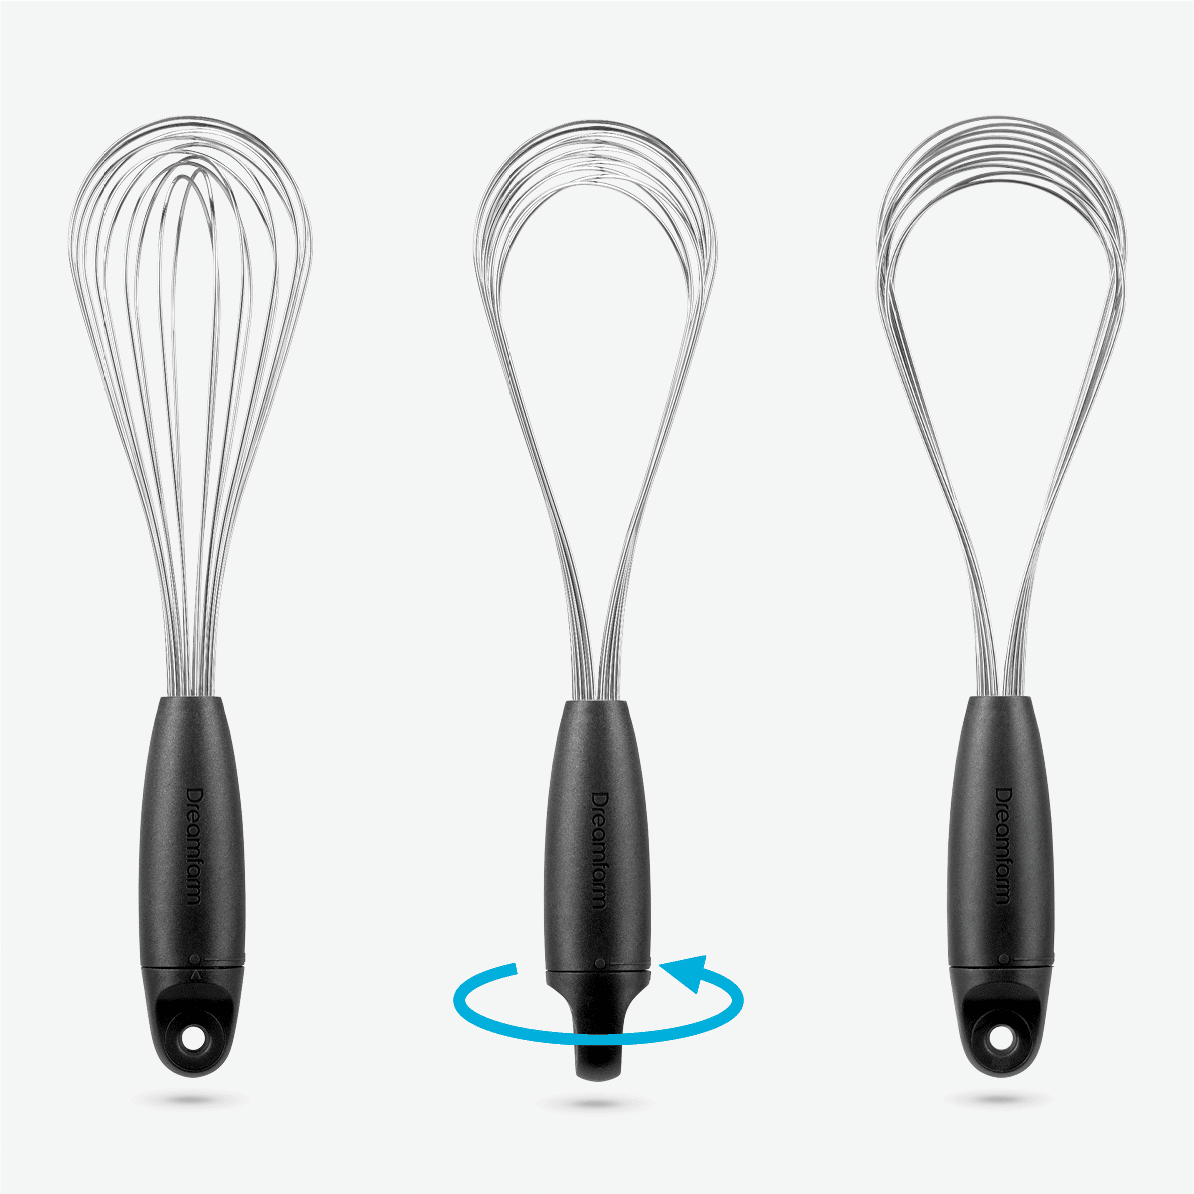 Flisk is a balloon whisk that twists to create three whisks from one. A half turn of Flisk’s ergonomic handle twists the 10 large, high-vibration wires into 3 distinct forms – a large balloon whisk for whipping, a sauce whisk for shallow liquids and gravy, and a flat whisk for deglazing. Best of all, Flisk’s wires completely flatten for space-saving storage and easy cleaning in the dishwasher. Go on, it’s time to whisk it for the biscuit.